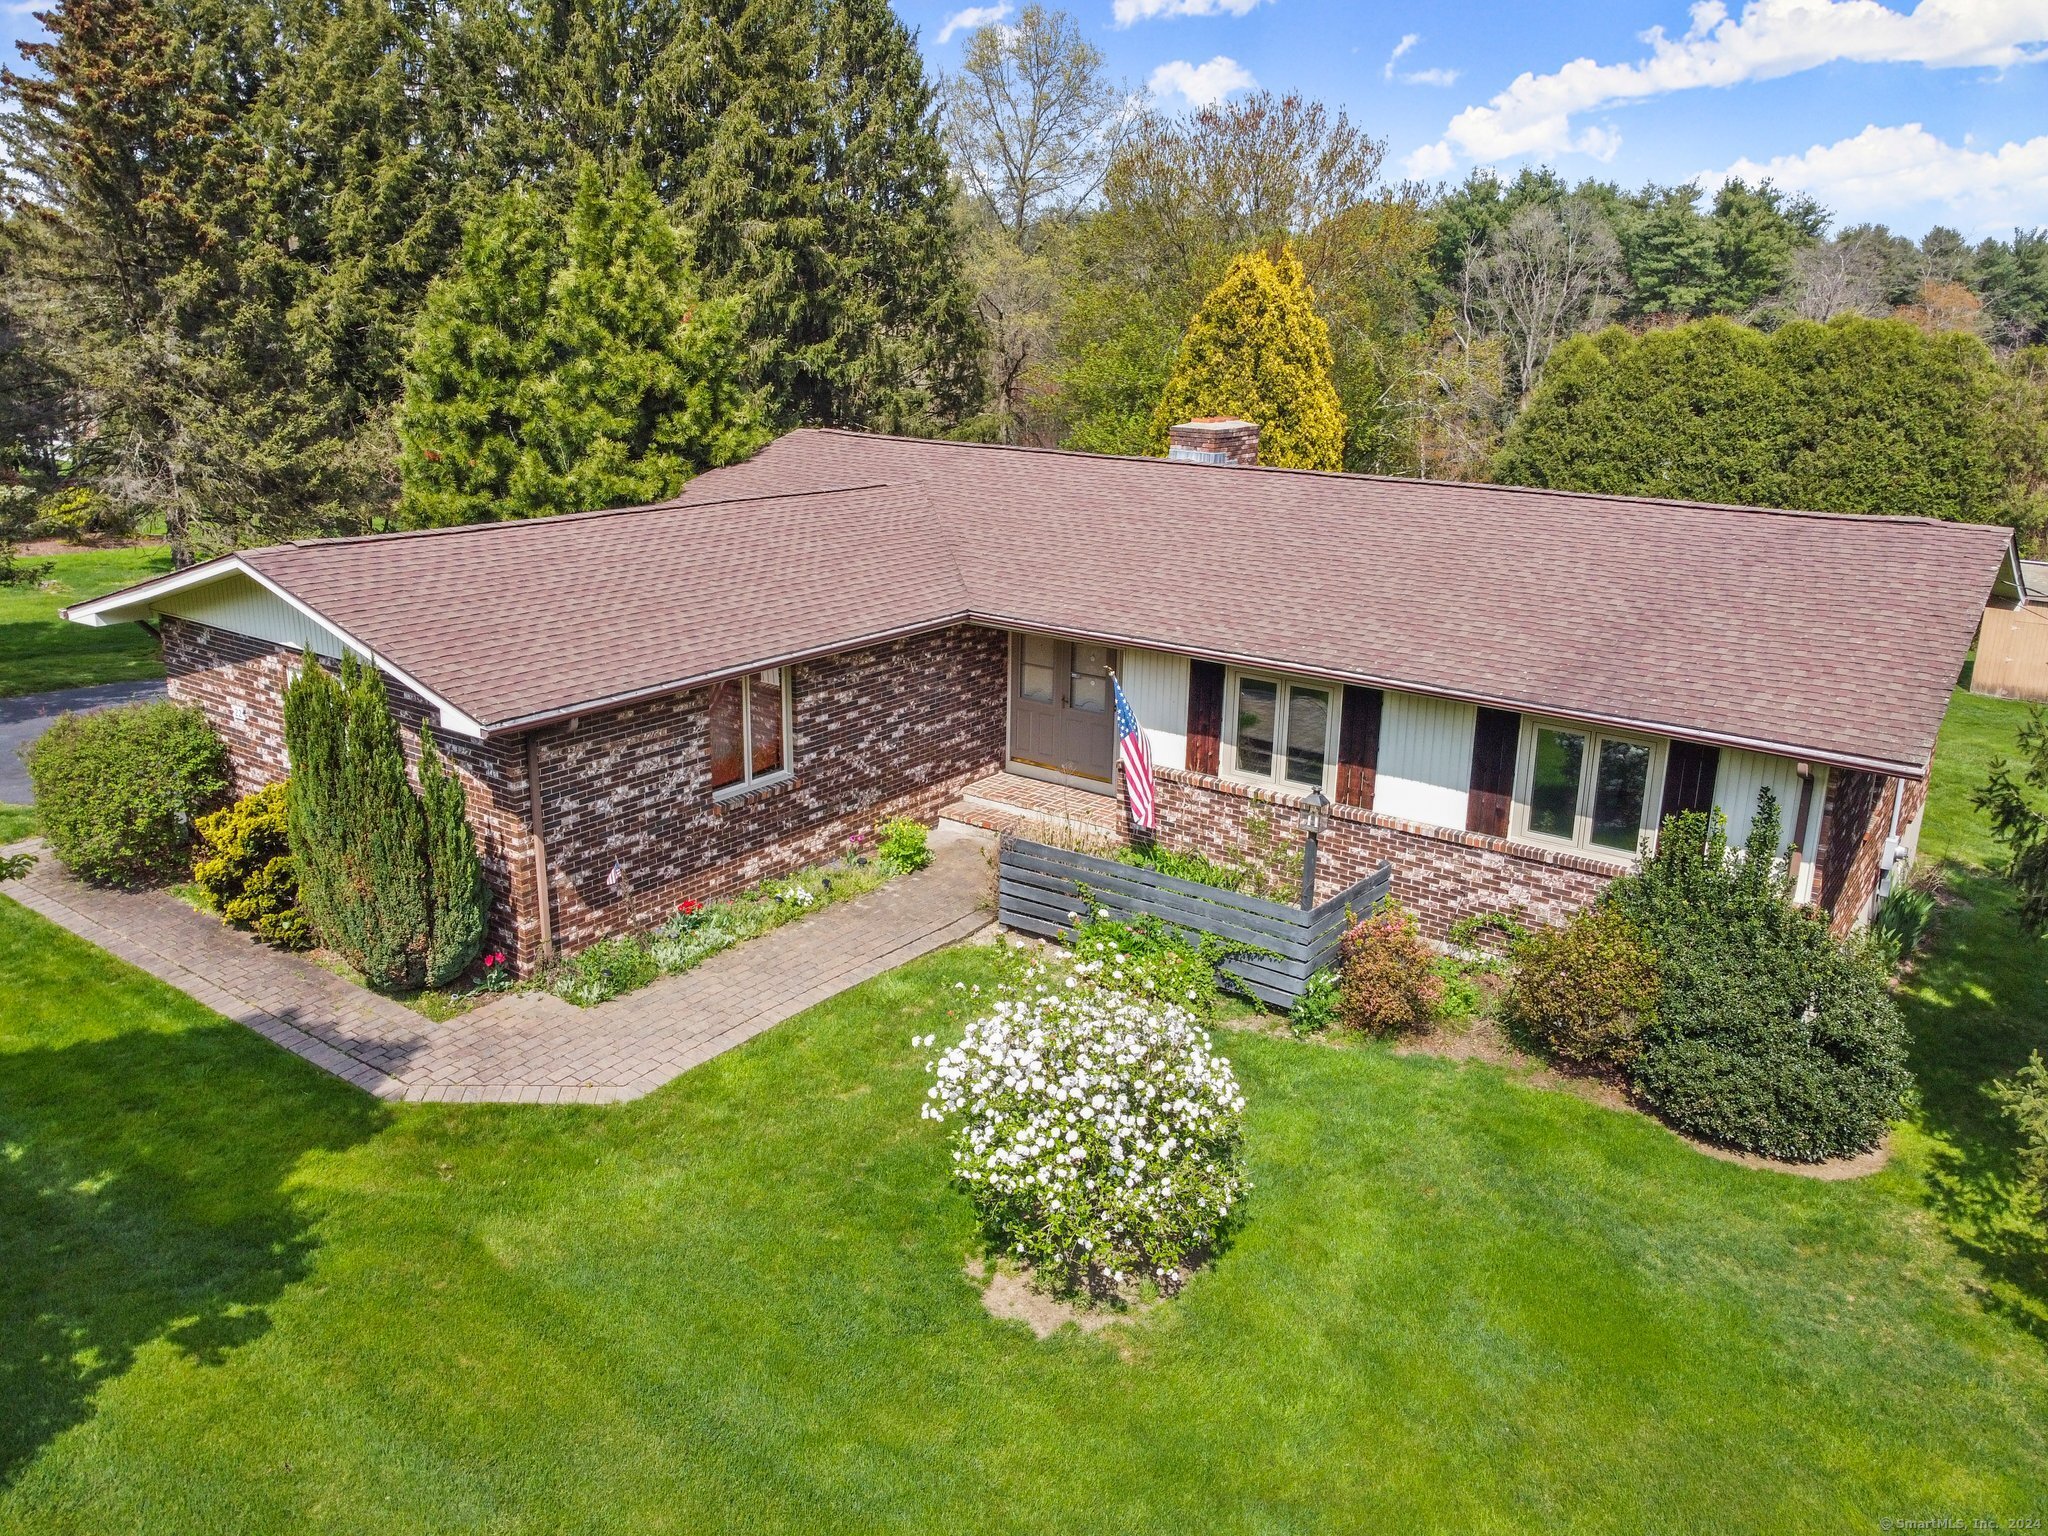 22 High Meadow Road Shelton CT